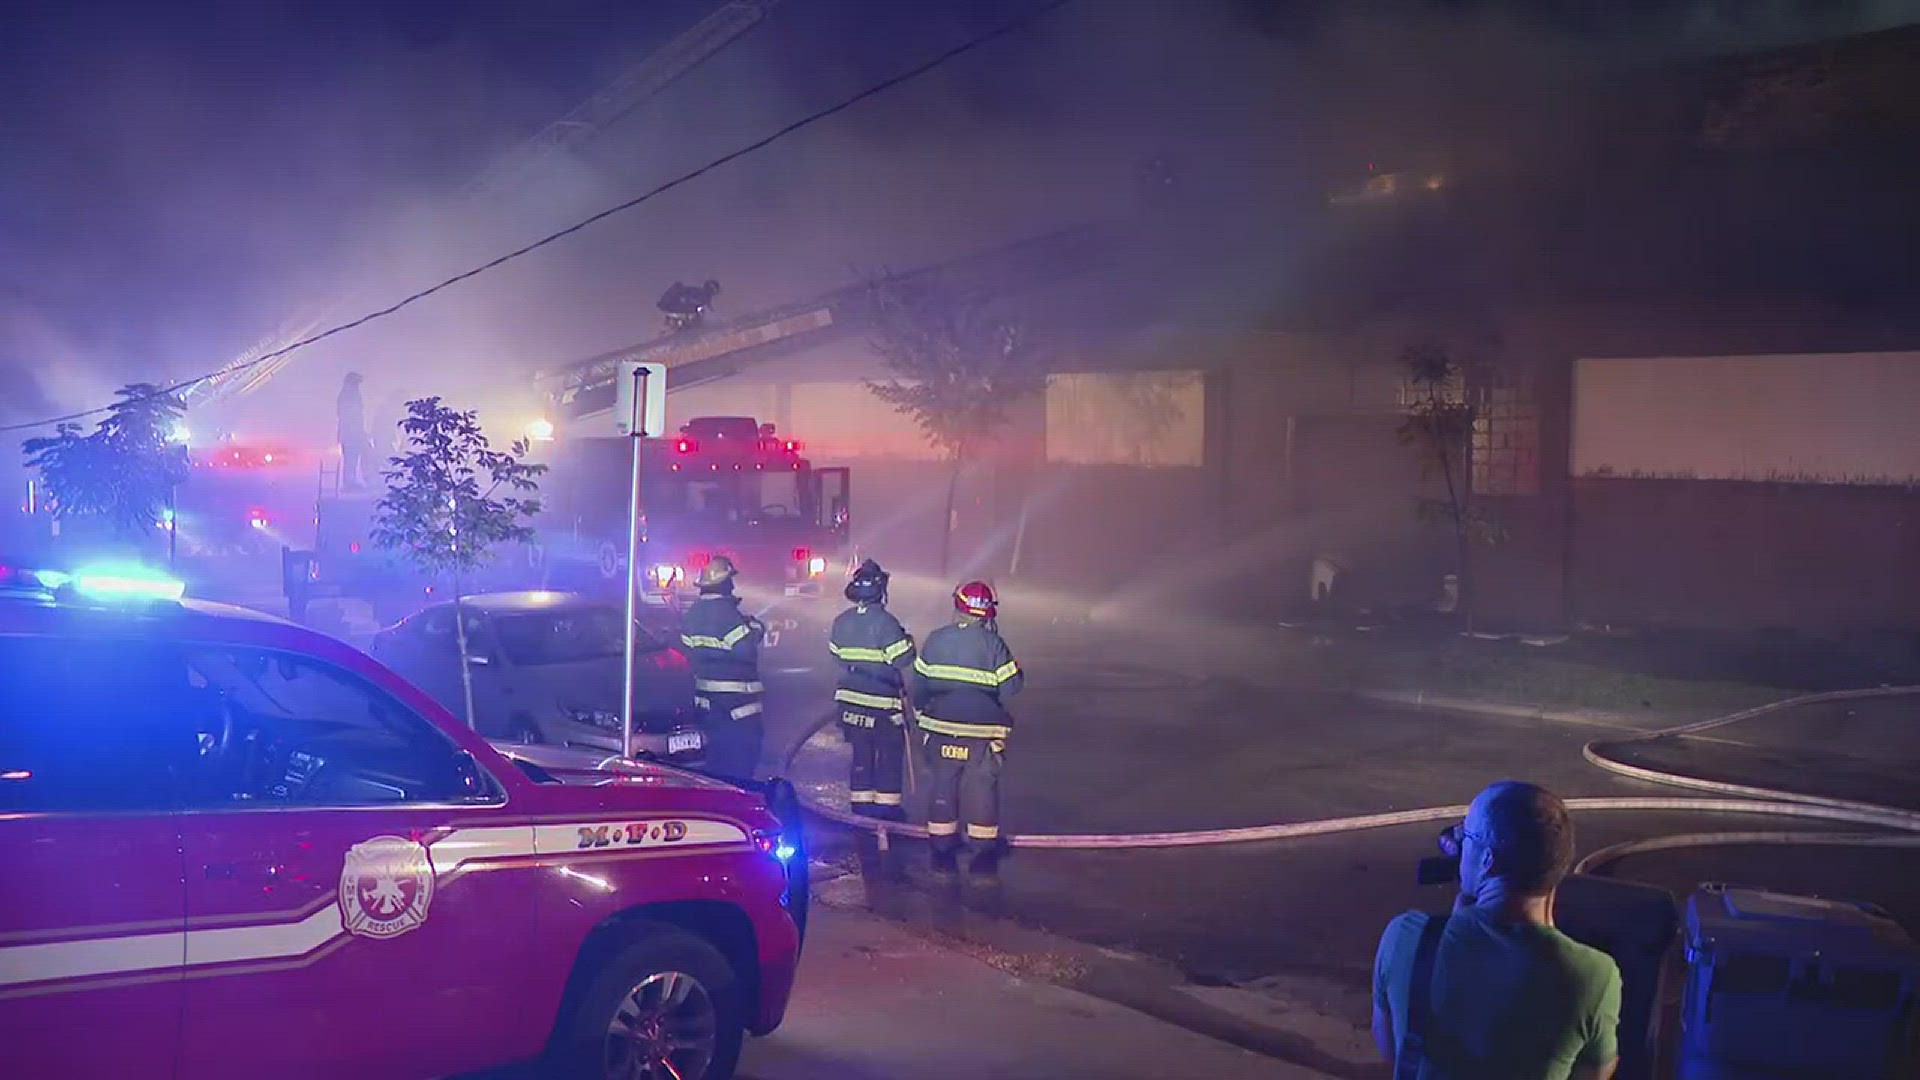 Crews worked hard overnight Friday into Saturday to contain a fire that tore through a commercial building in northeast Minneapolis.